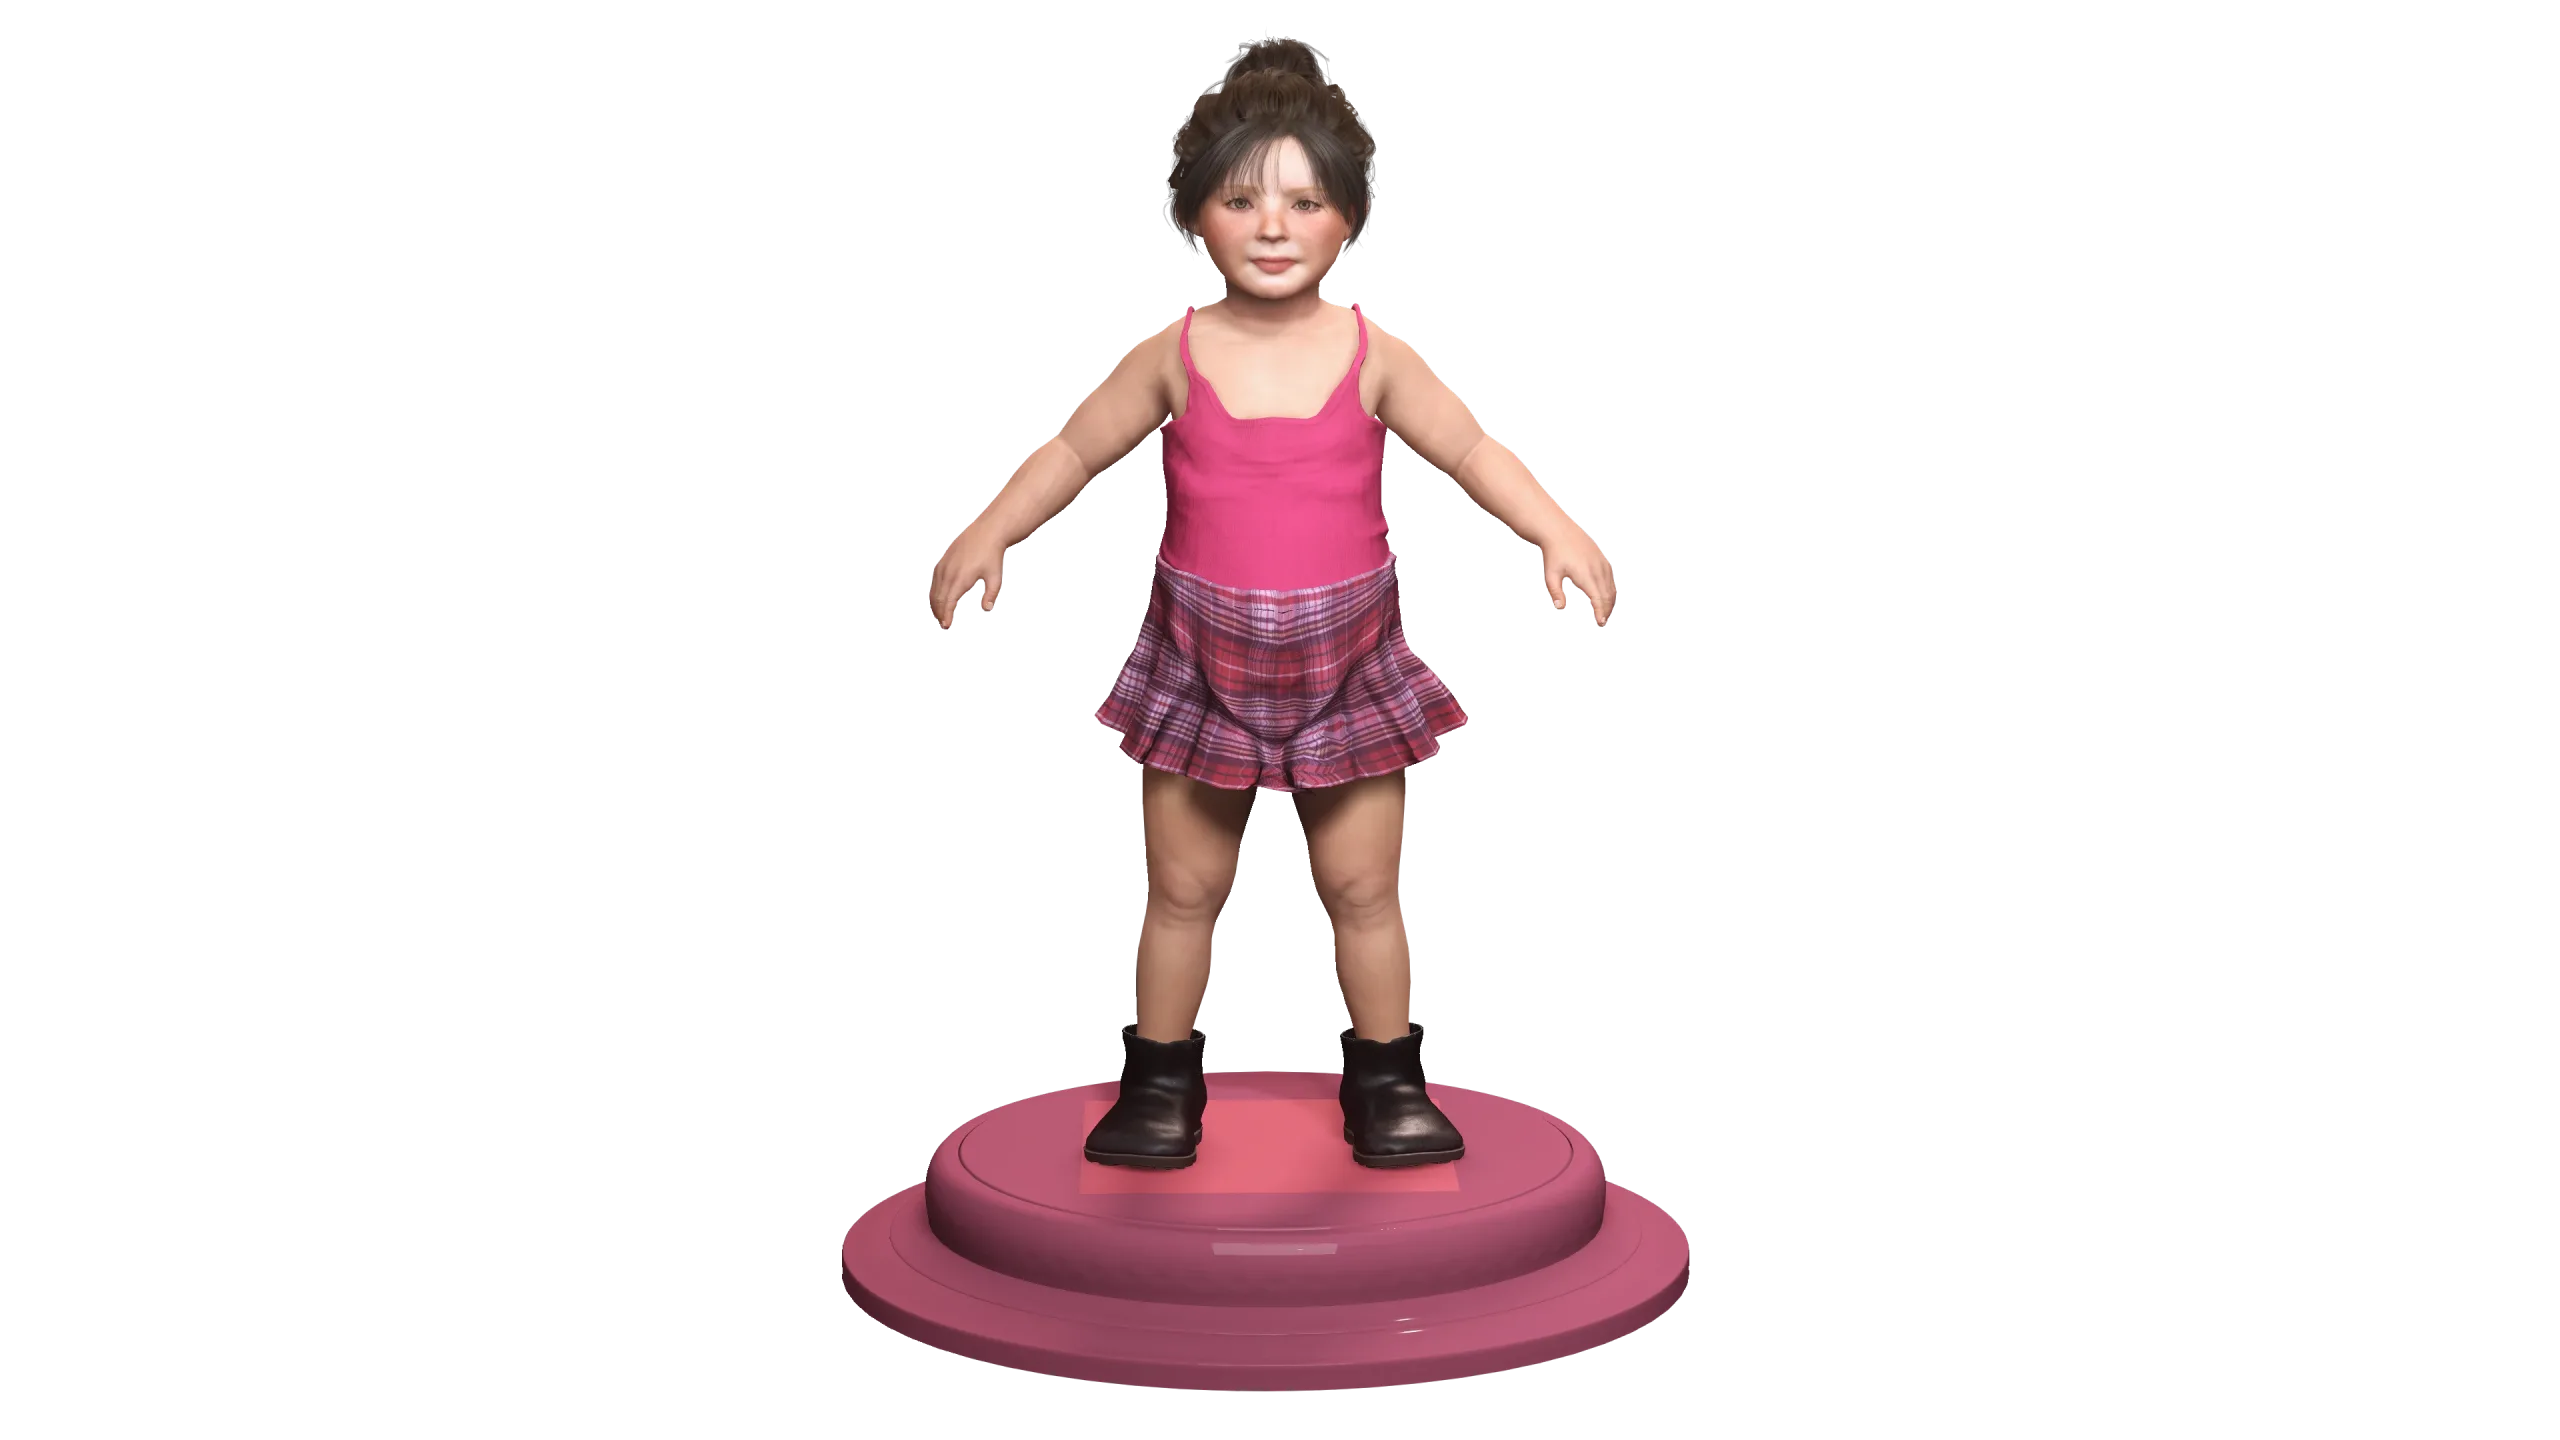 AAA 3D REALISTIC CHARACTER-EUROPEAN TODDLER or LITTLE GIRL 01